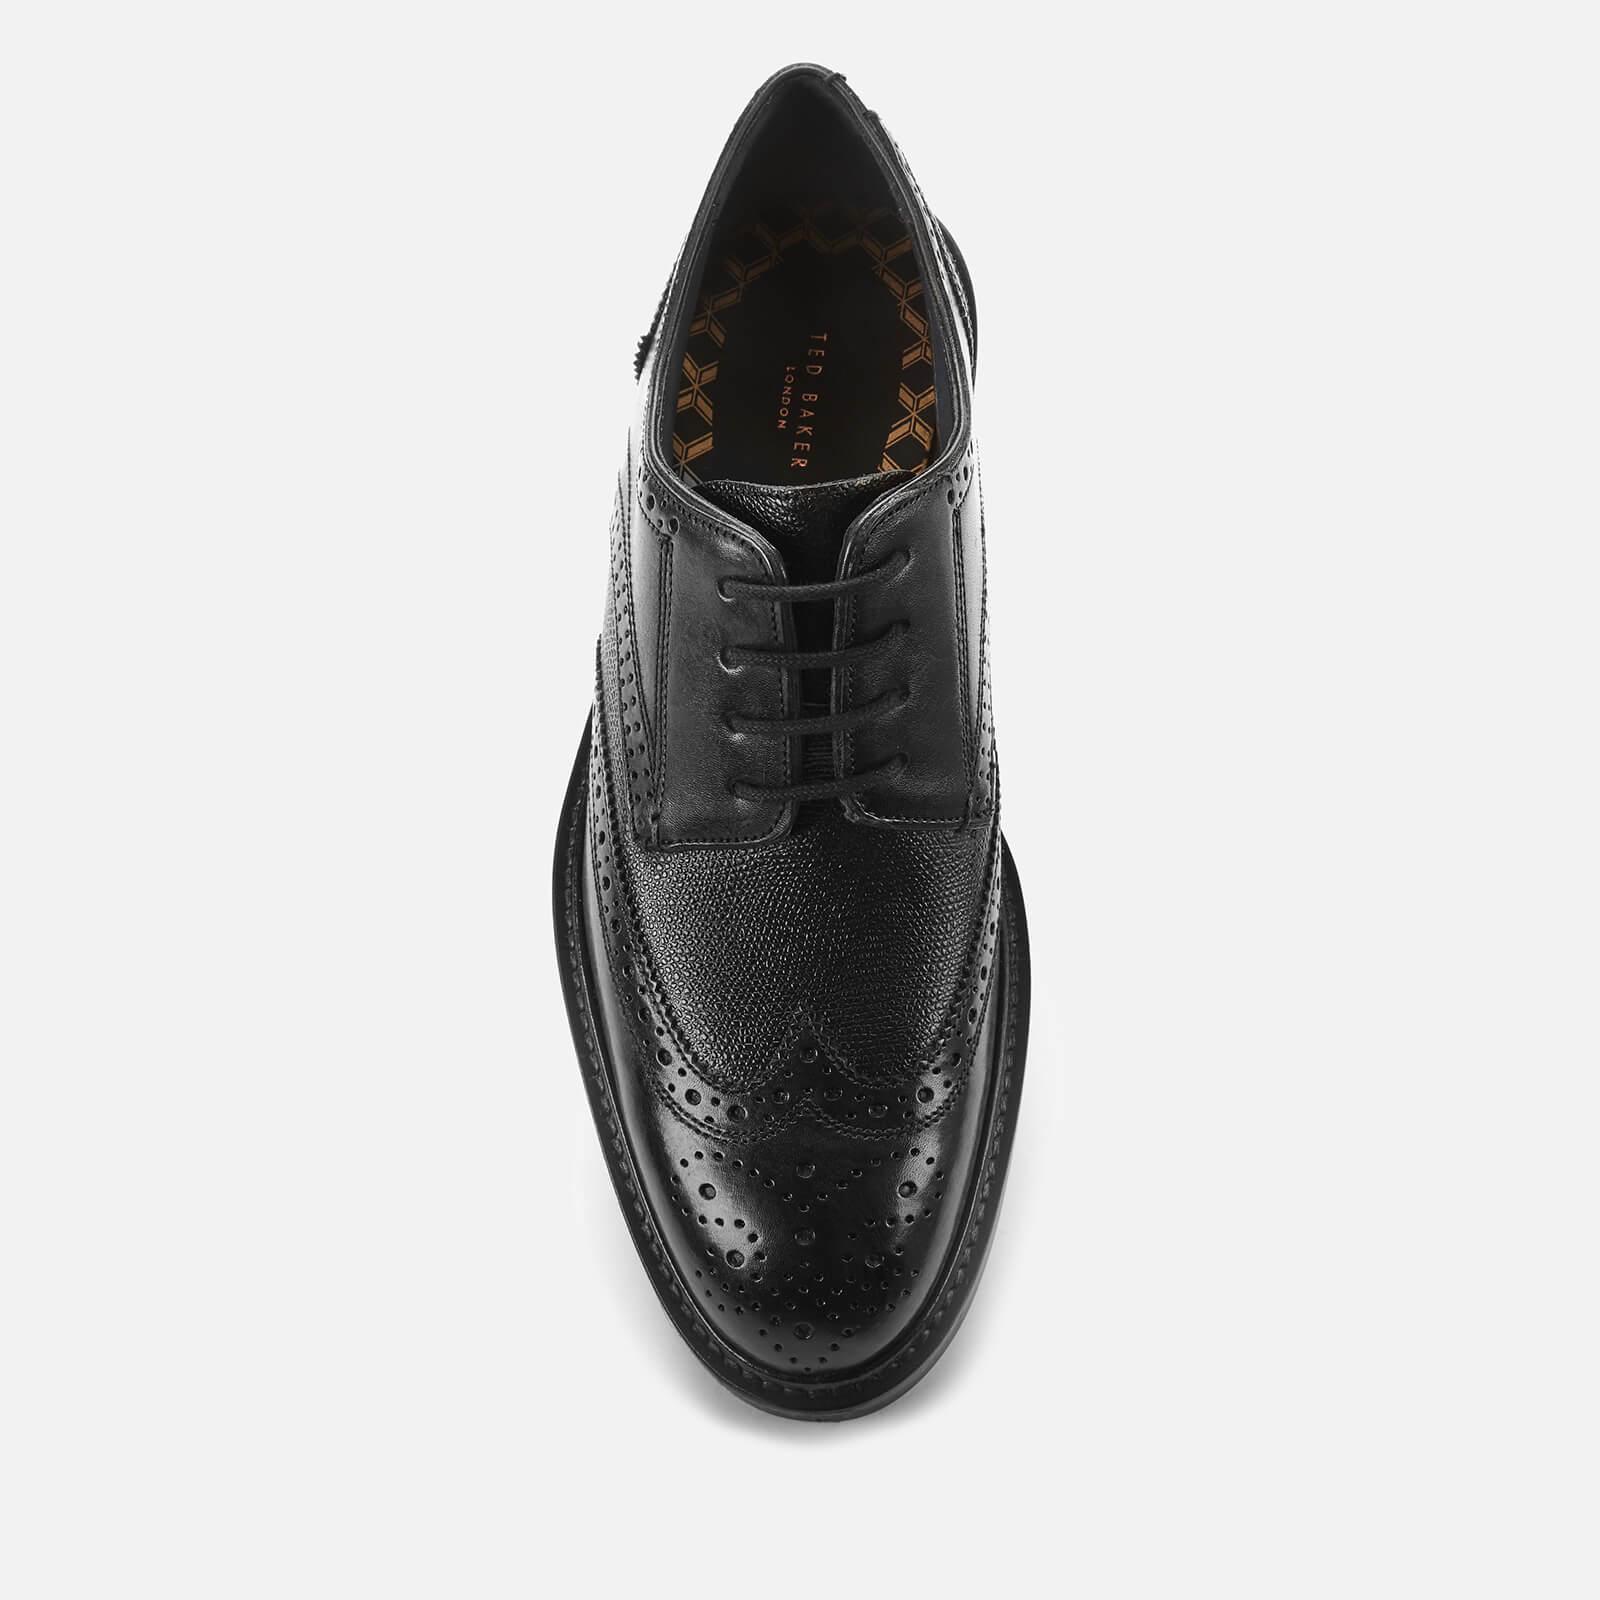 Ted Baker Theruu Leather Brogues in Black for Men - Lyst